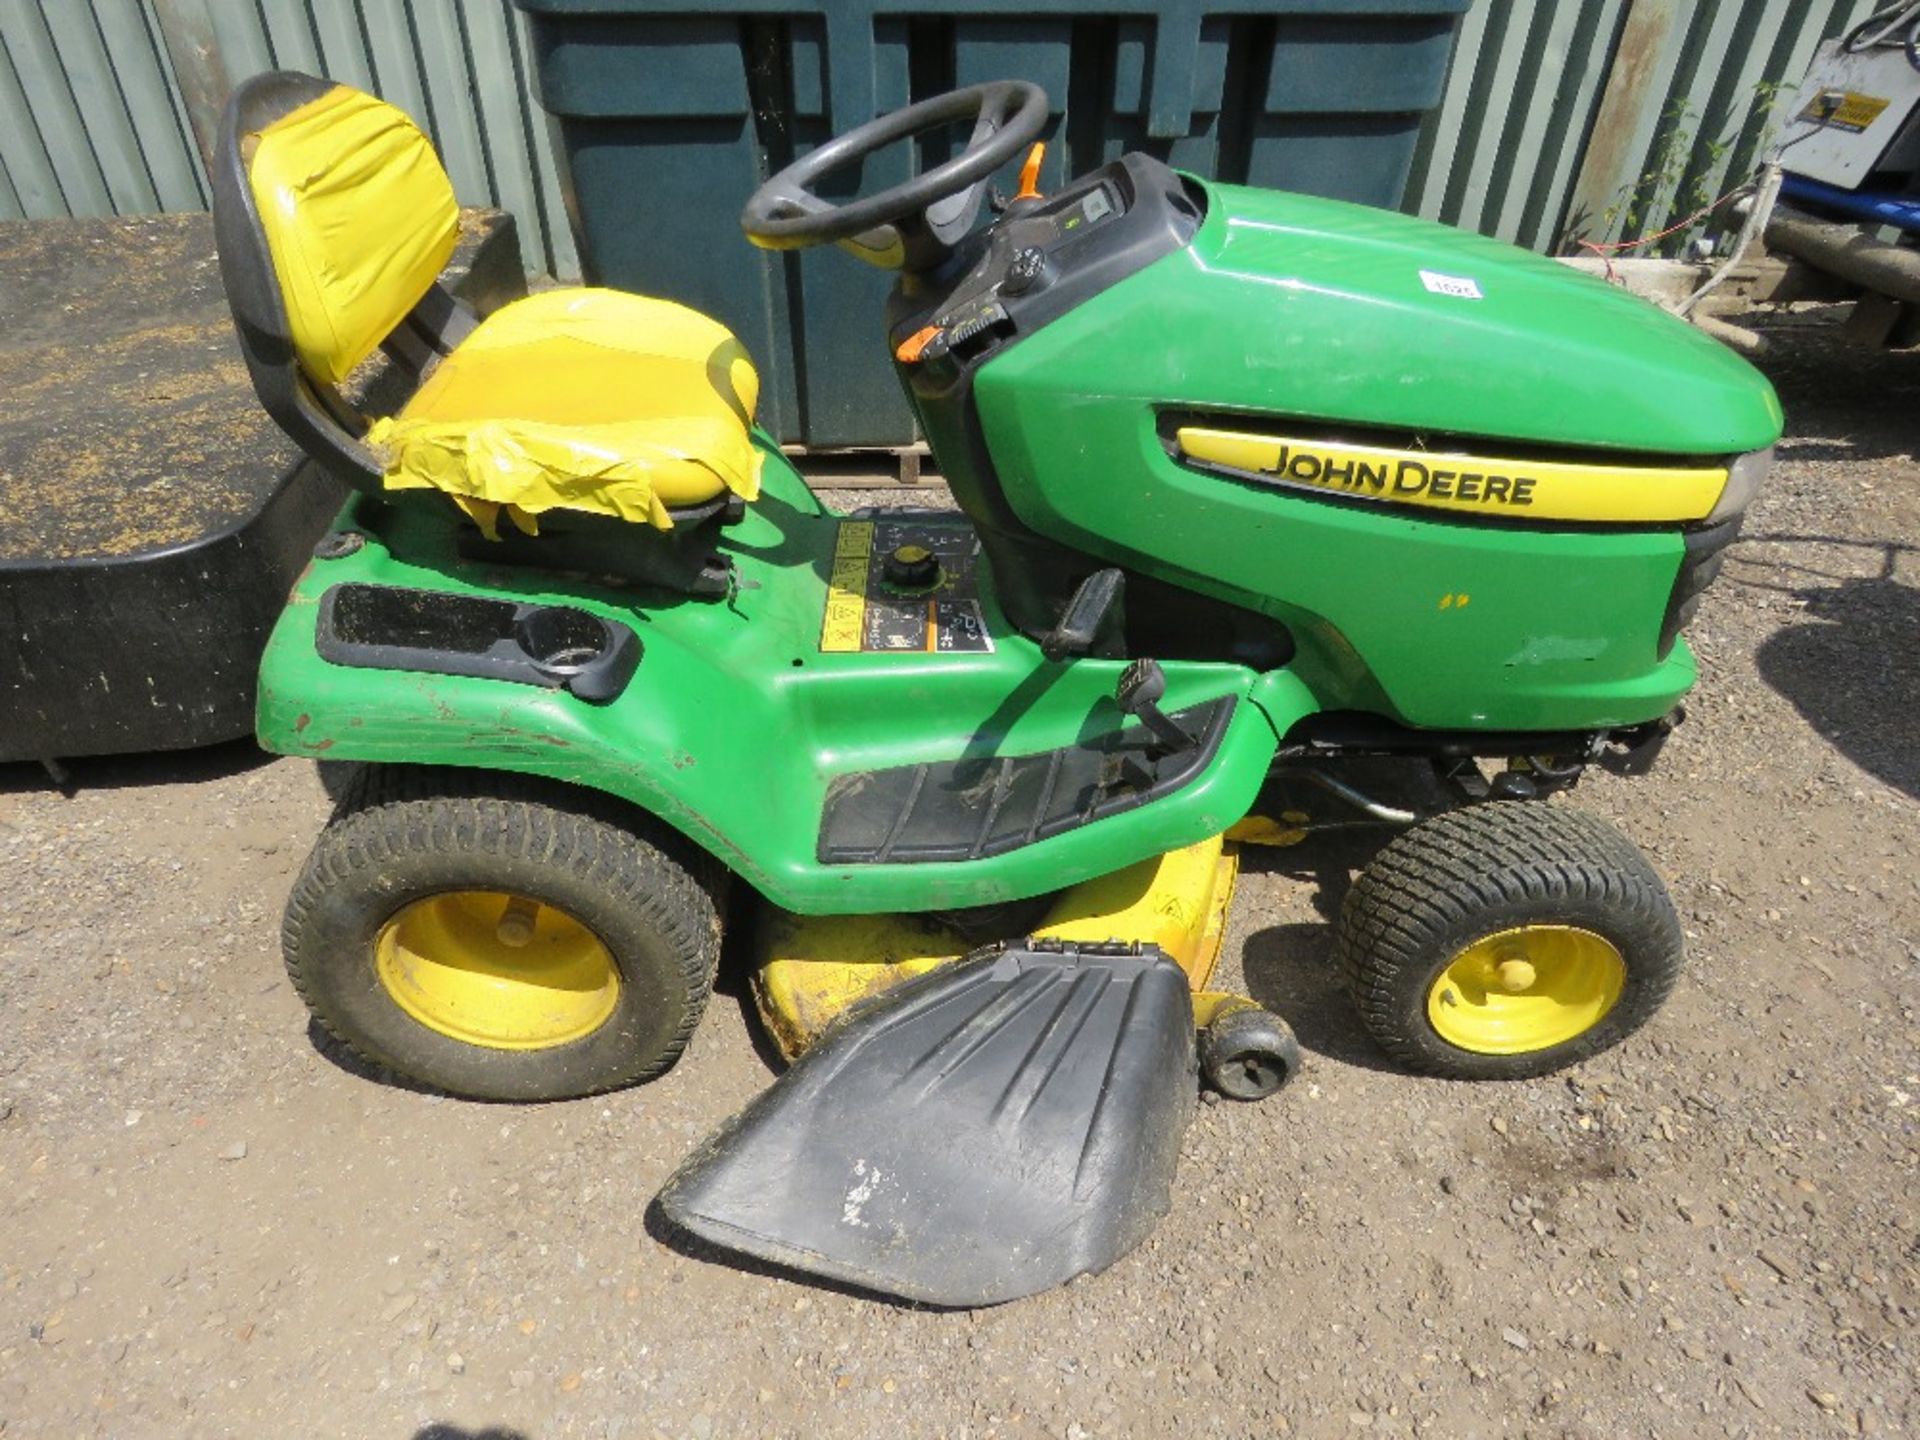 JOHN DEERE X320 PETROL RIDE ON MOWER, 756 REC HOURS. RUNS AND DRIVES BUT MOWERS NOT ENGAGING...NO BE - Image 6 of 11